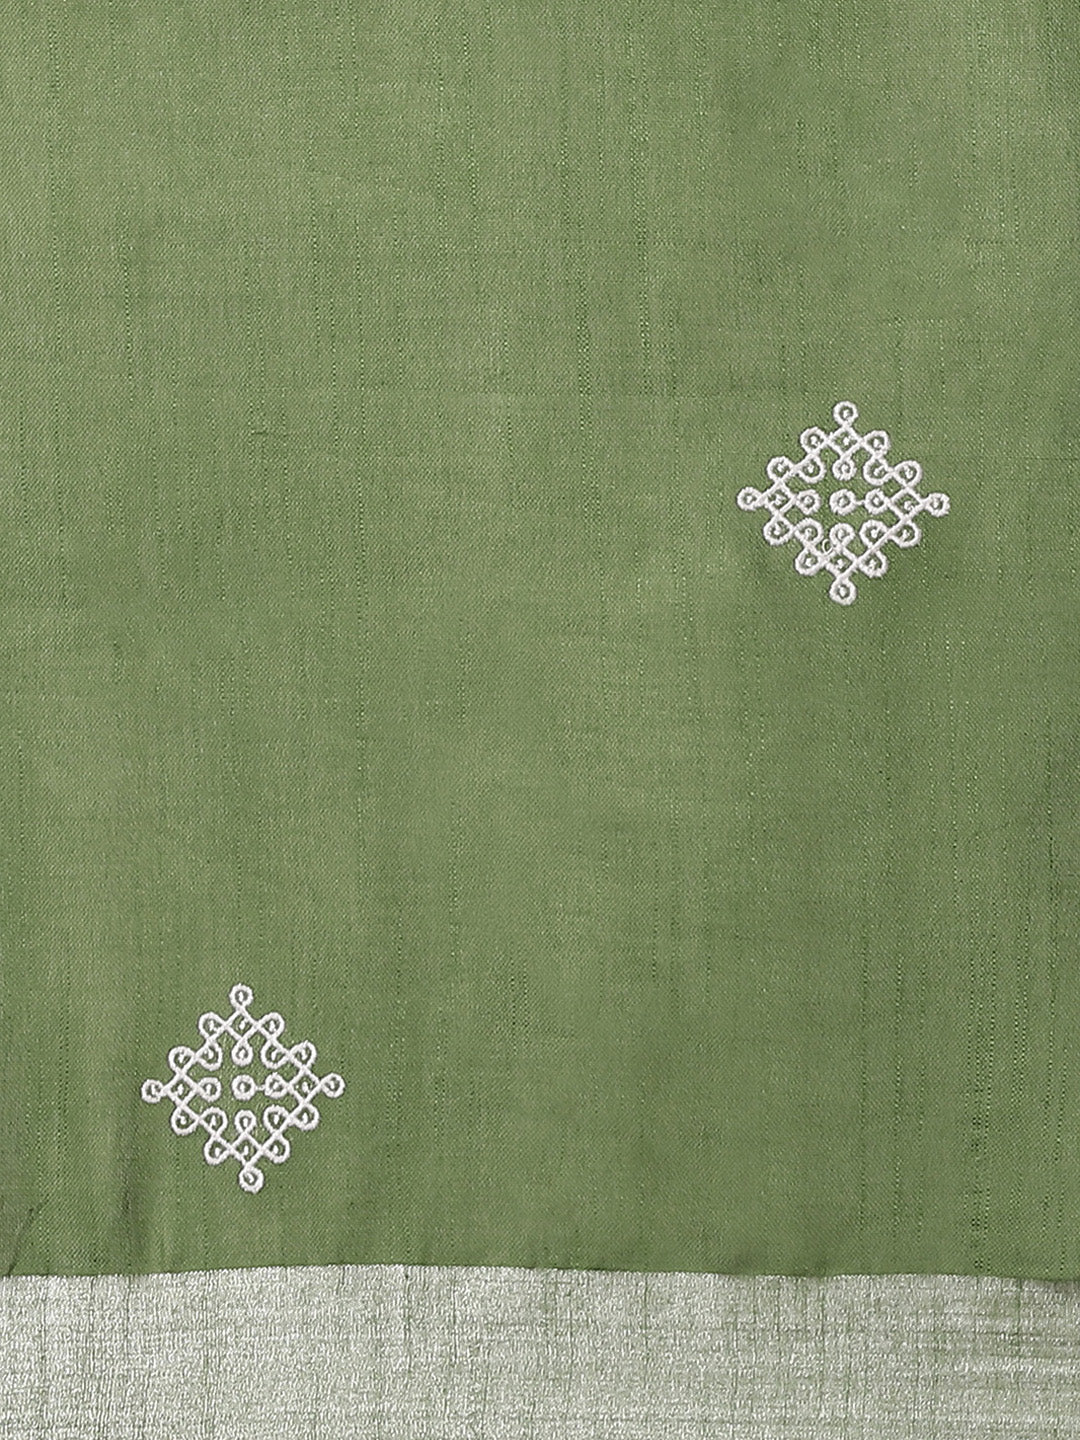 Green and White, Kalakari India Linen Woven Saree and Blouse ALBGSA0055-Saree-Kalakari India-ALBGSA0055-Cotton, Geographical Indication, Hand Crafted, Heritage Prints, Linen, Natural Dyes, Red, Sarees, Shibori, Sustainable Fabrics, Woven, Yellow-[Linen,Ethnic,wear,Fashionista,Handloom,Handicraft,Indigo,blockprint,block,print,Cotton,Chanderi,Blue, latest,classy,party,bollywood,trendy,summer,style,traditional,formal,elegant,unique,style,hand,block,print, dabu,booti,gift,present,glamorous,affordabl